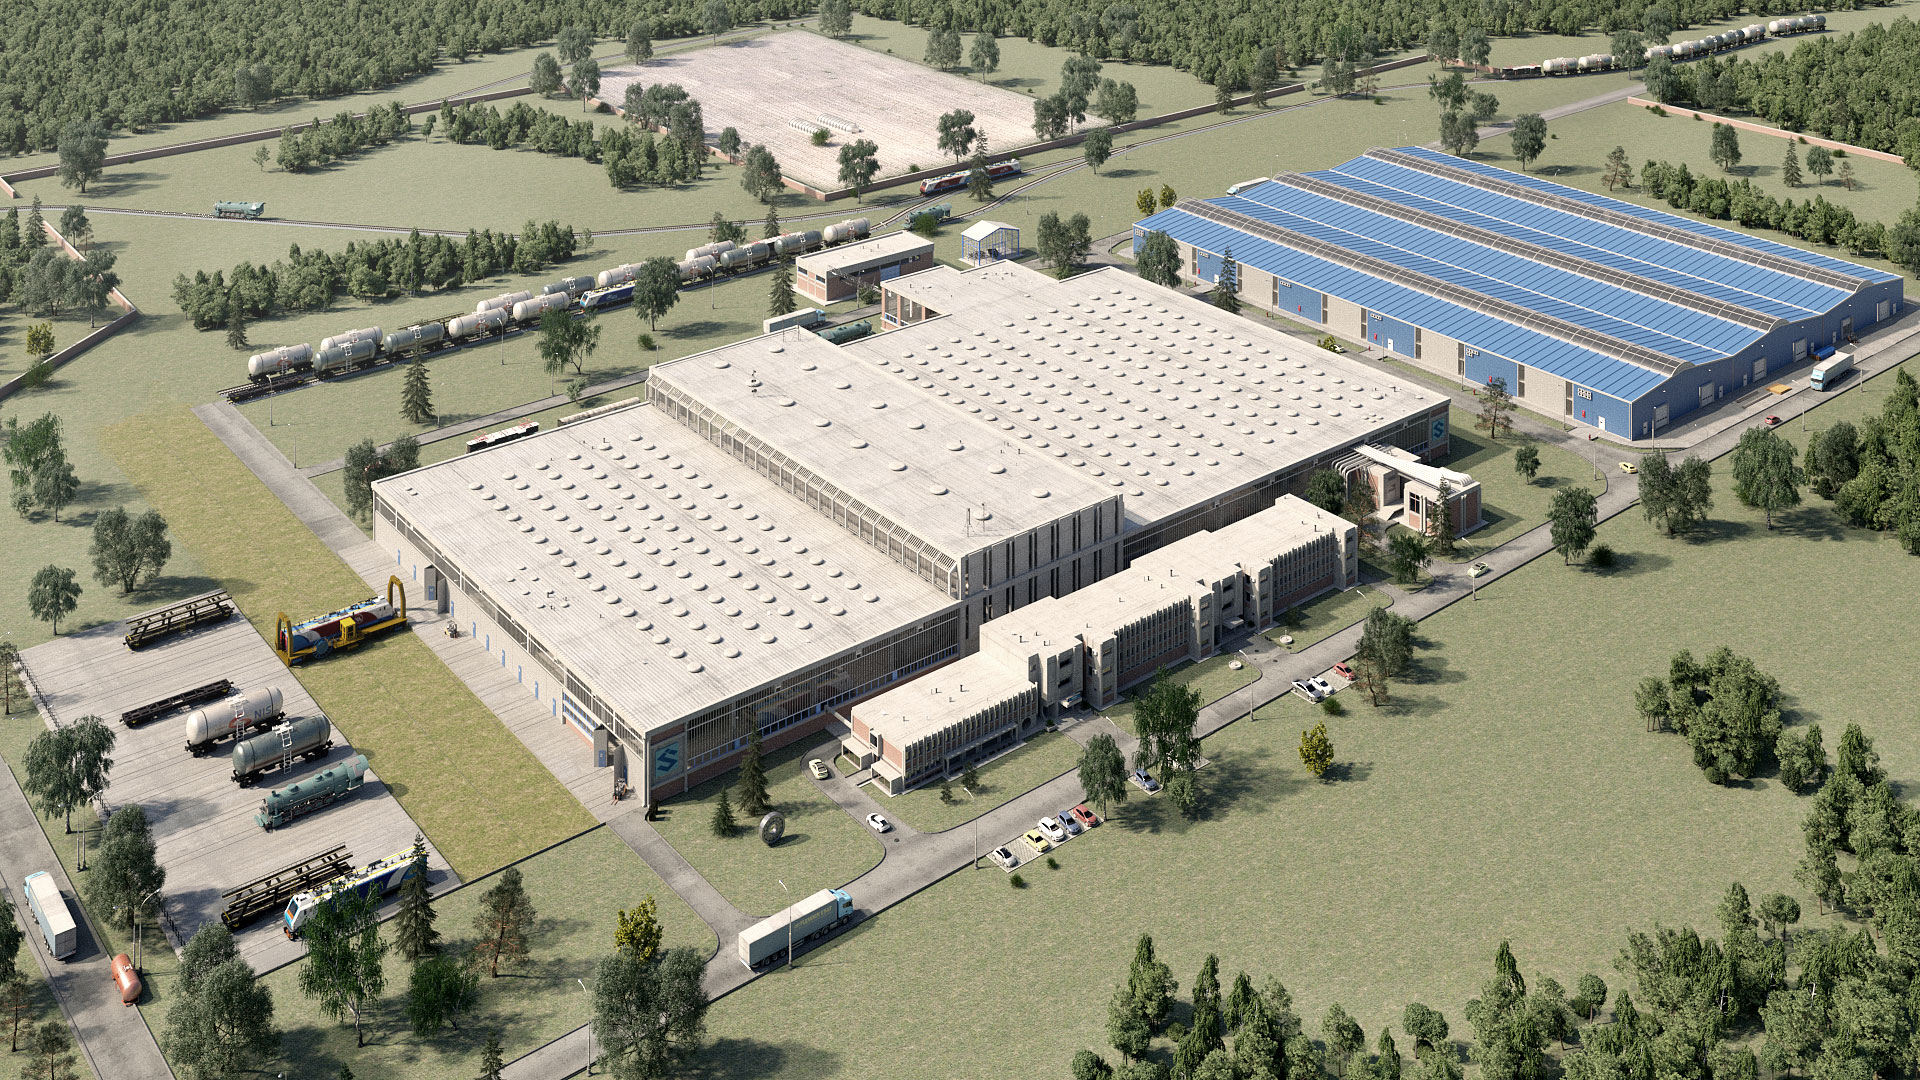 architectural-visualization-train-factory-exterior-3d-aerial-view-modeling-rendering-1nx